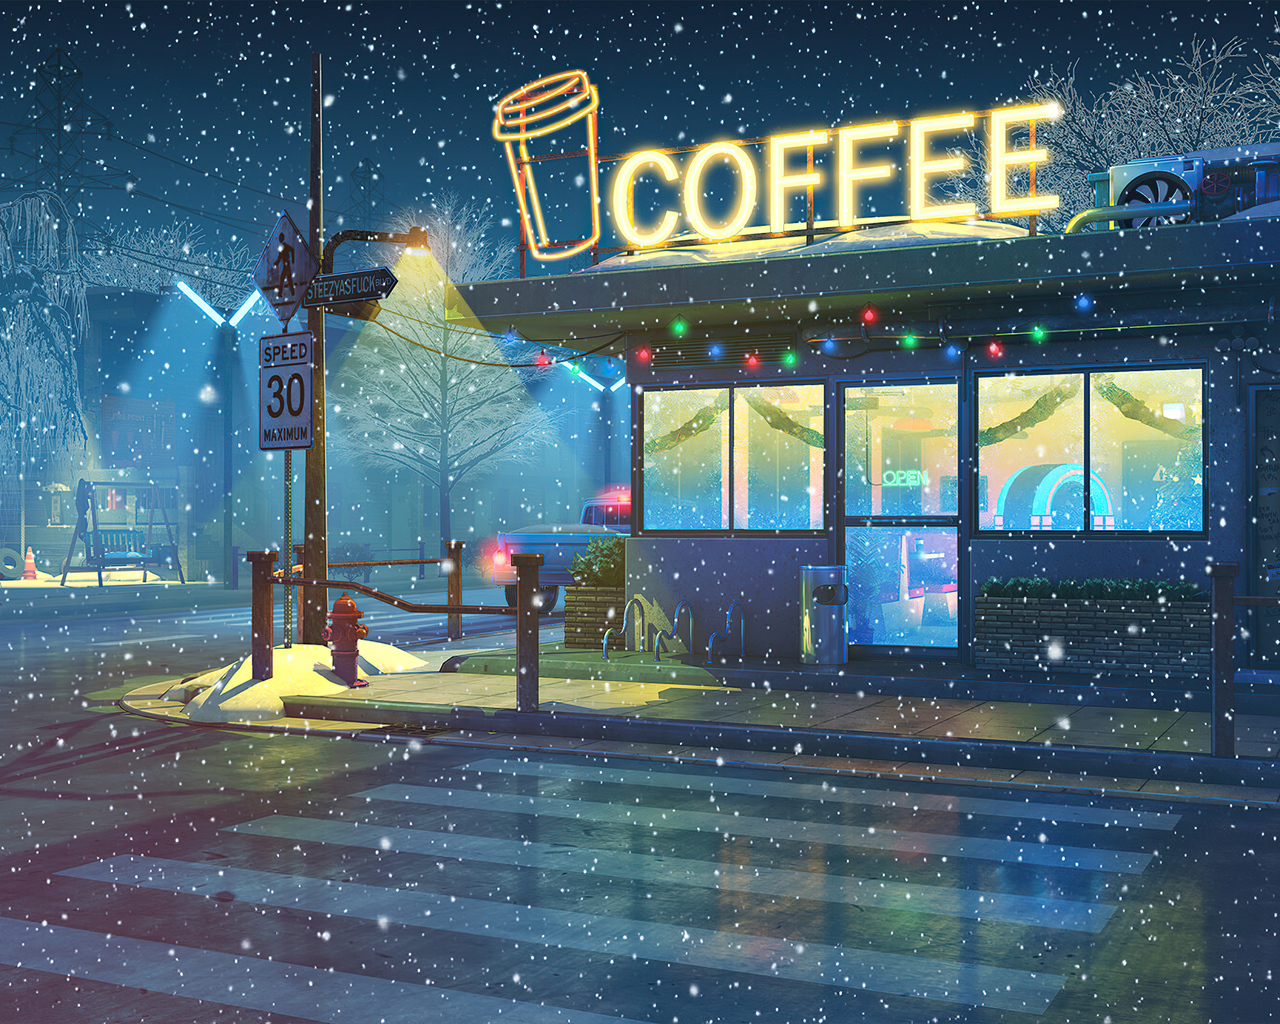 Lo Fi Cafe 4k 1280x1024 Resolution HD 4k Wallpaper, Image, Background, Photo and Picture